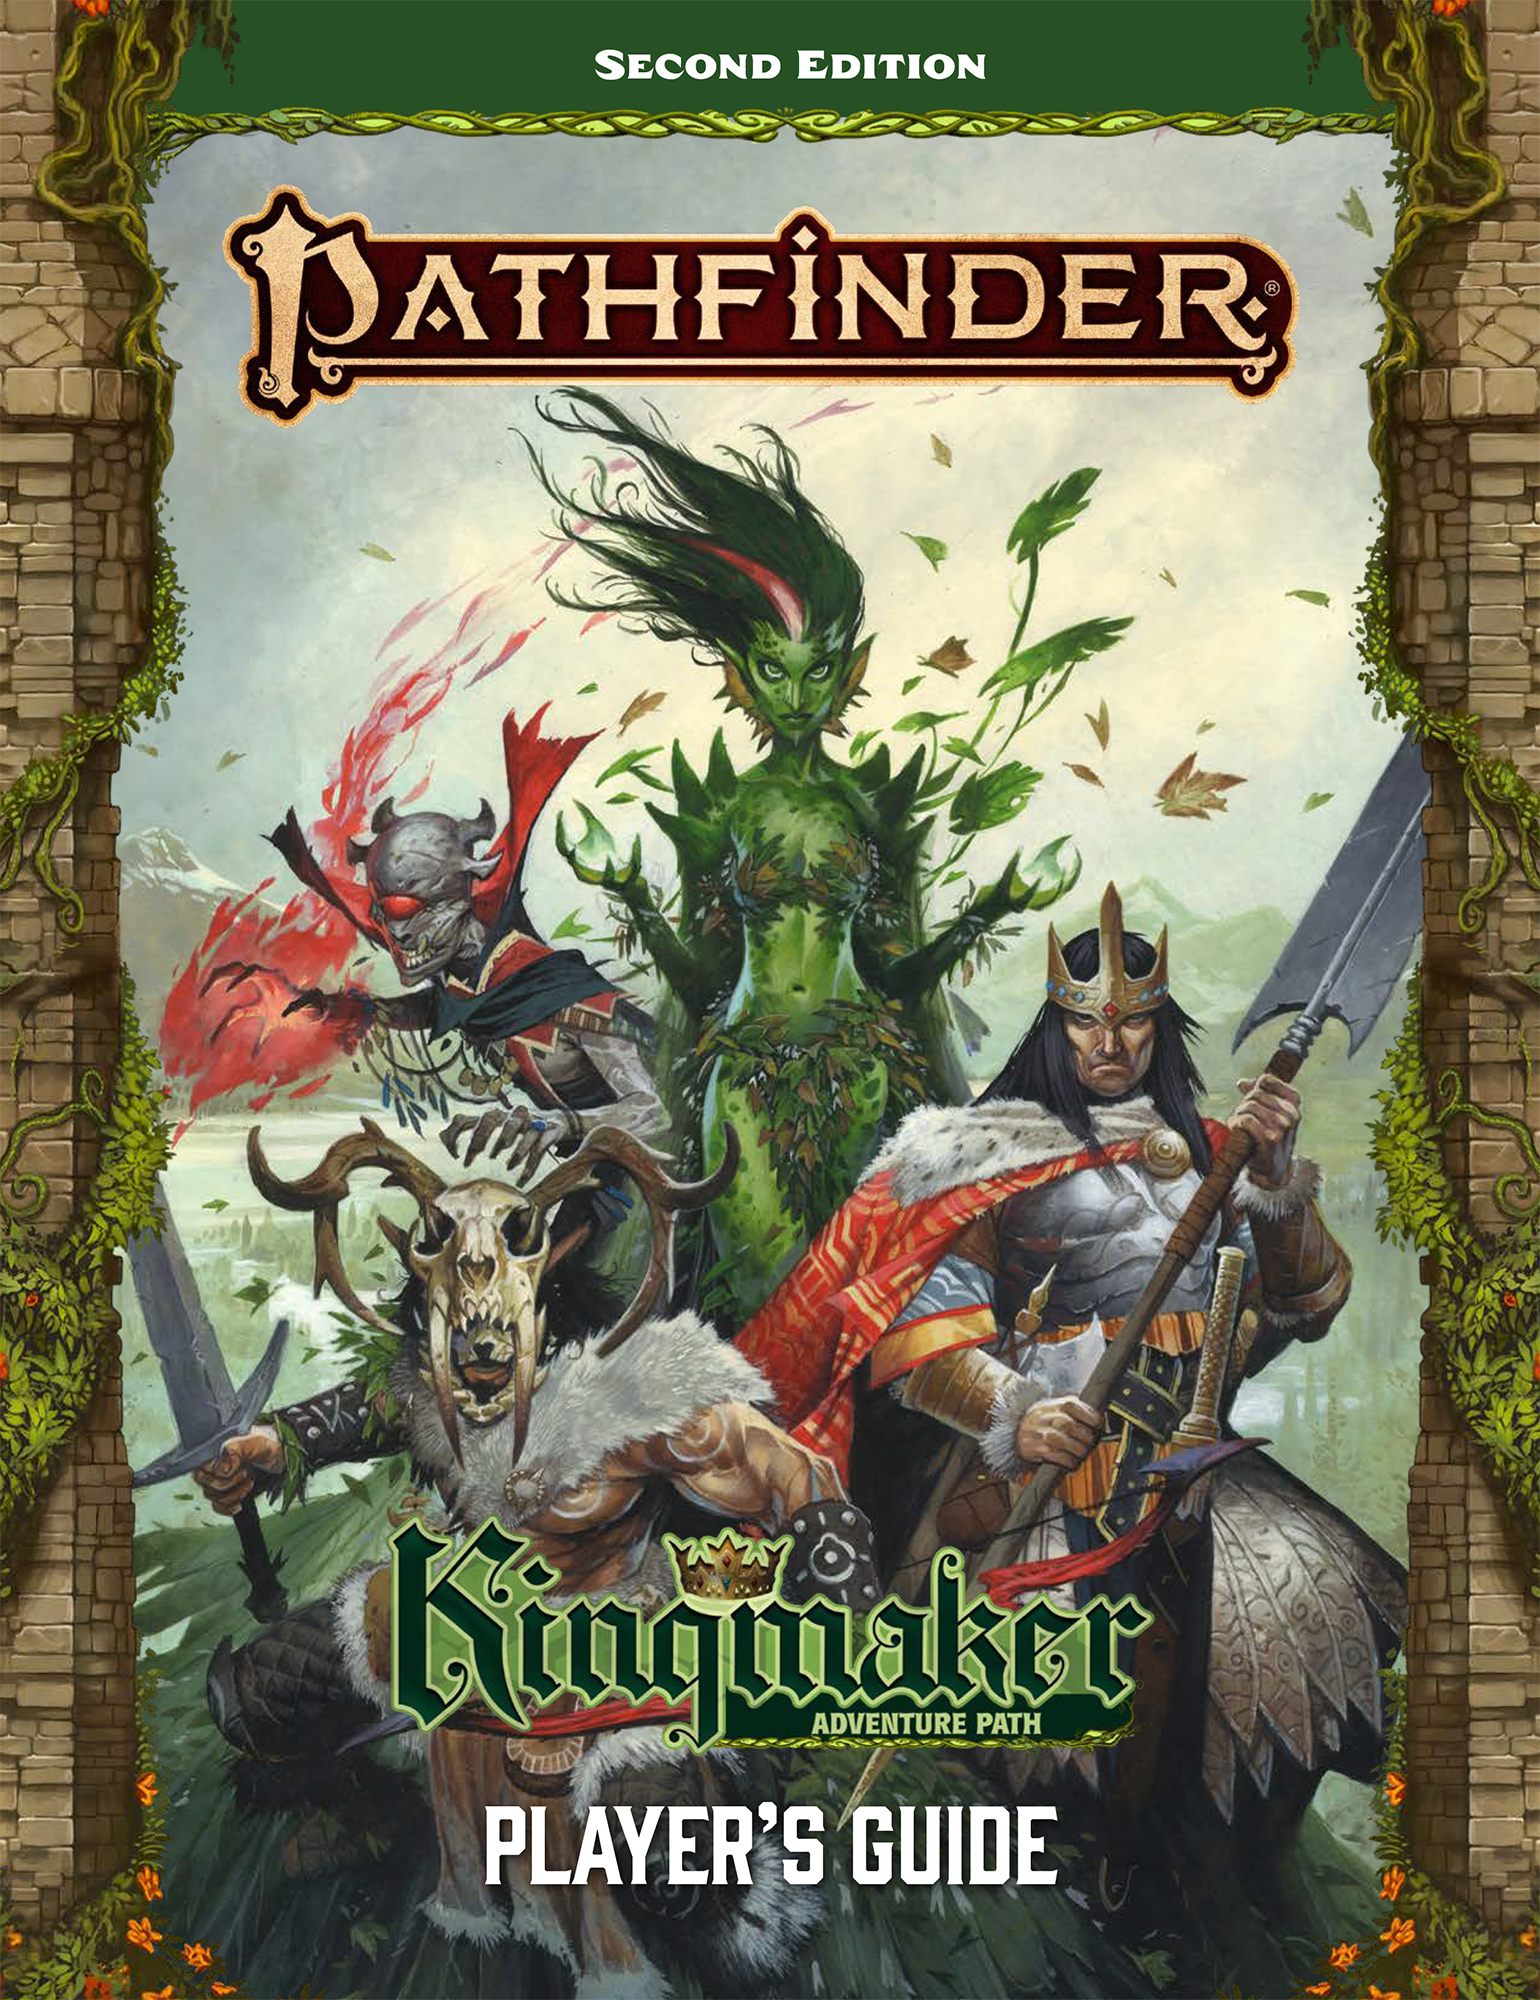 Pathfinder Kingmaker Player's Guide Cover. Three figures face the viewer, on the left a red eyed cyclops lichee, in the middle a green plantlike woman, and a human king holding a halberd